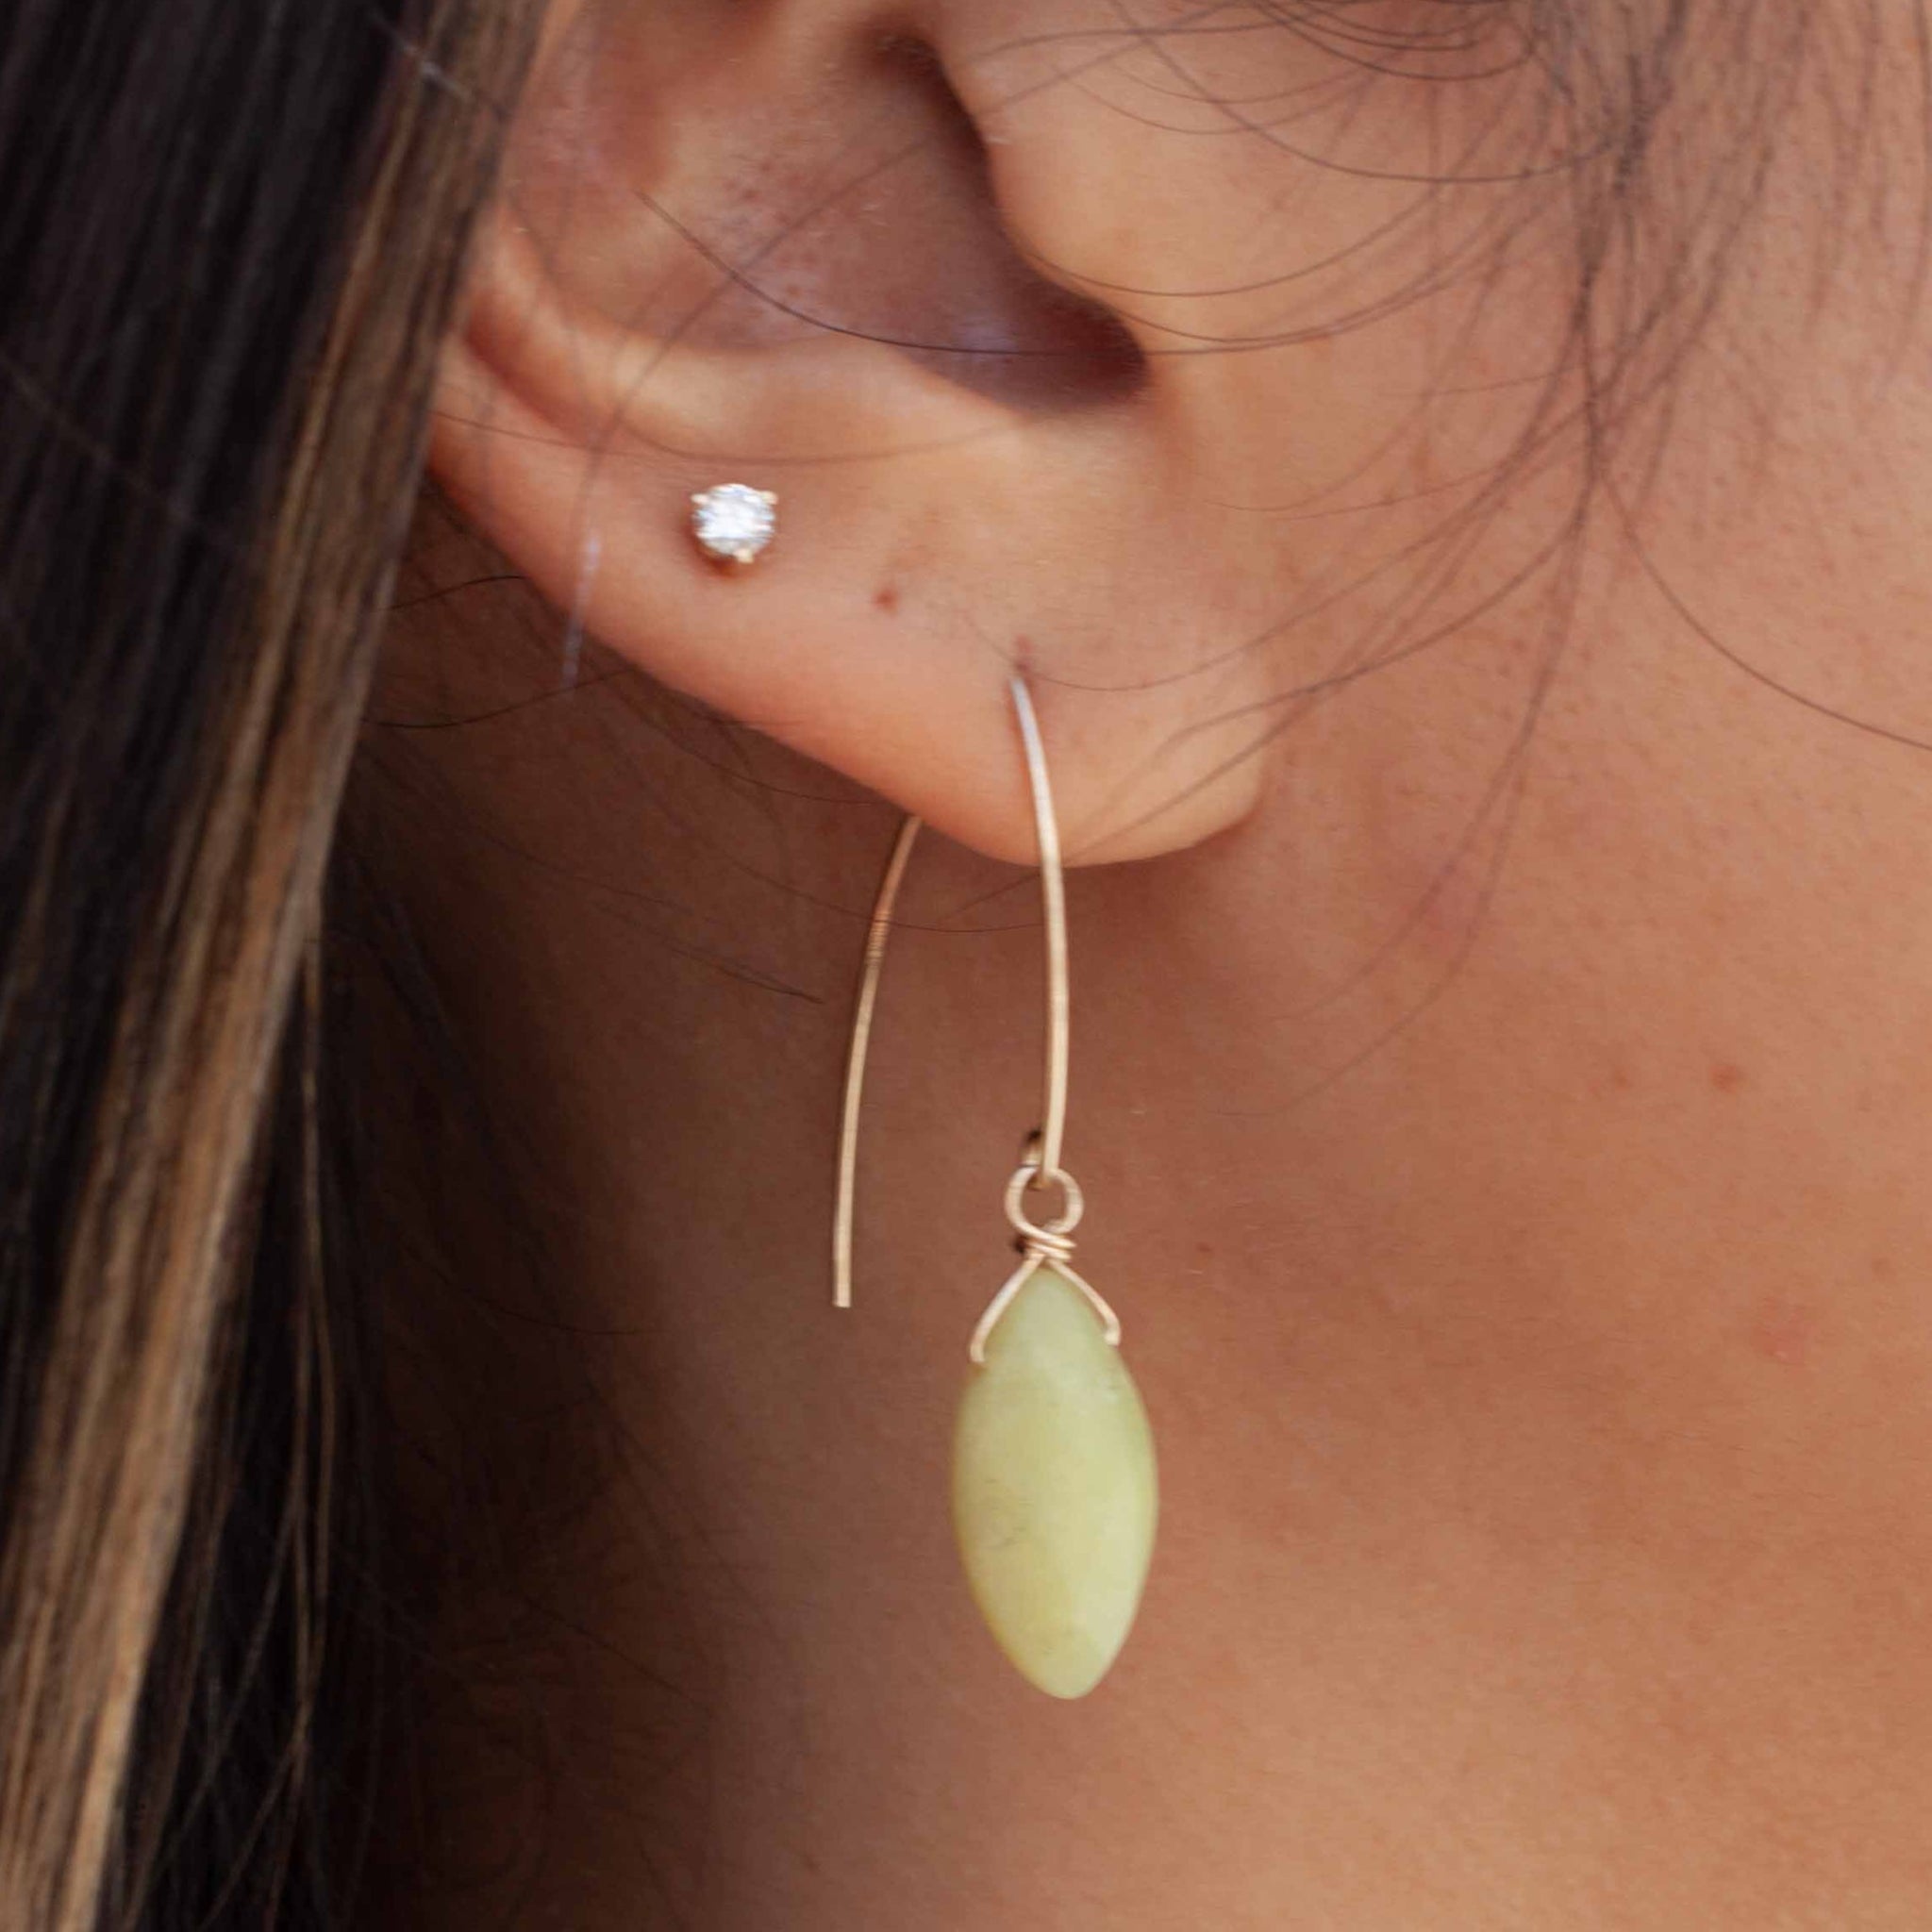 These gold and olive jade earrings are the perfect pop of colour for hot summer days. Pair with our olive jade statement necklace for a bold assertion of your summer beauty! 1 3/4 inch olive jade drop earrings on 14 karat gold filled* earring hooks (hypo allergenic and sensitive ear friendly). Handmade in Toronto by kp jewelry co. *gold-filled jewelry is composed of a solid layer of gold, mechanically bonded to sterling silver. You are fine to shower in it, get it wet, wear it for life! 